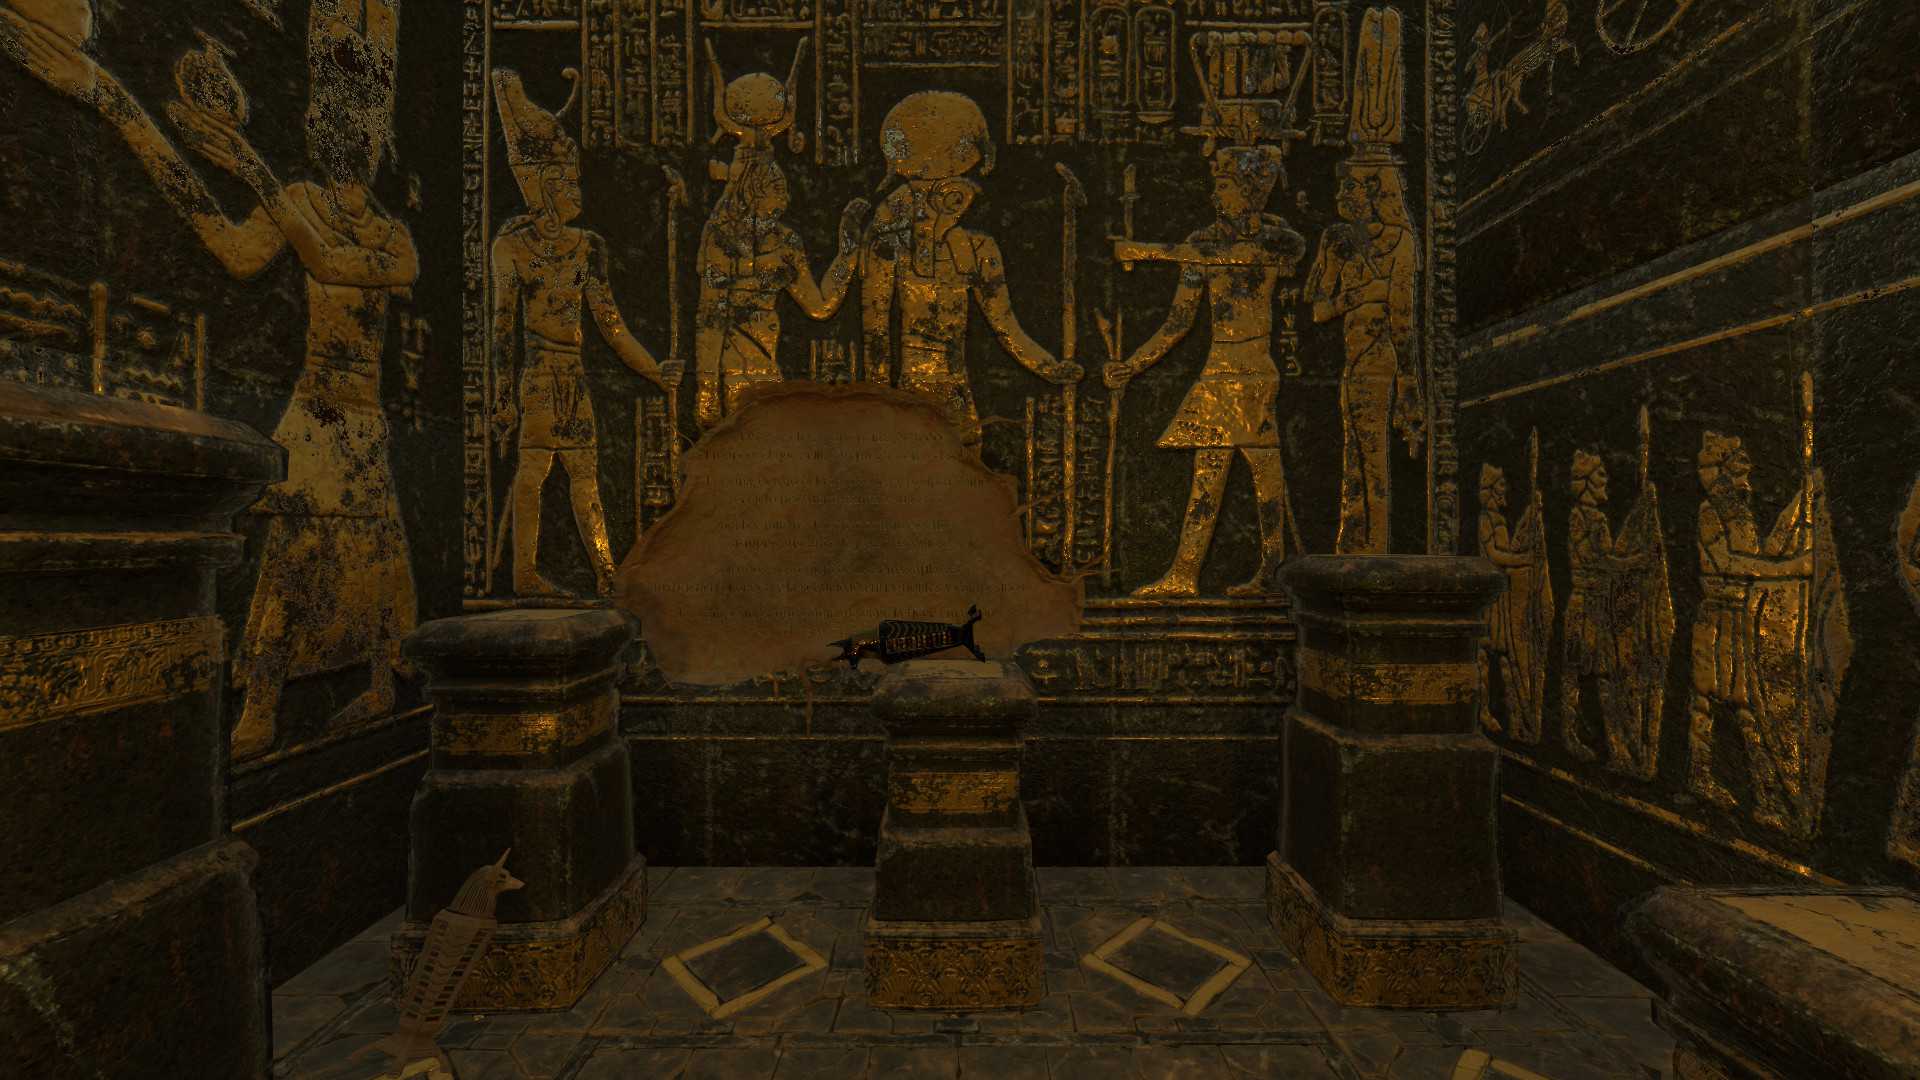 Lost Legends: The Pharaoh's Tomb